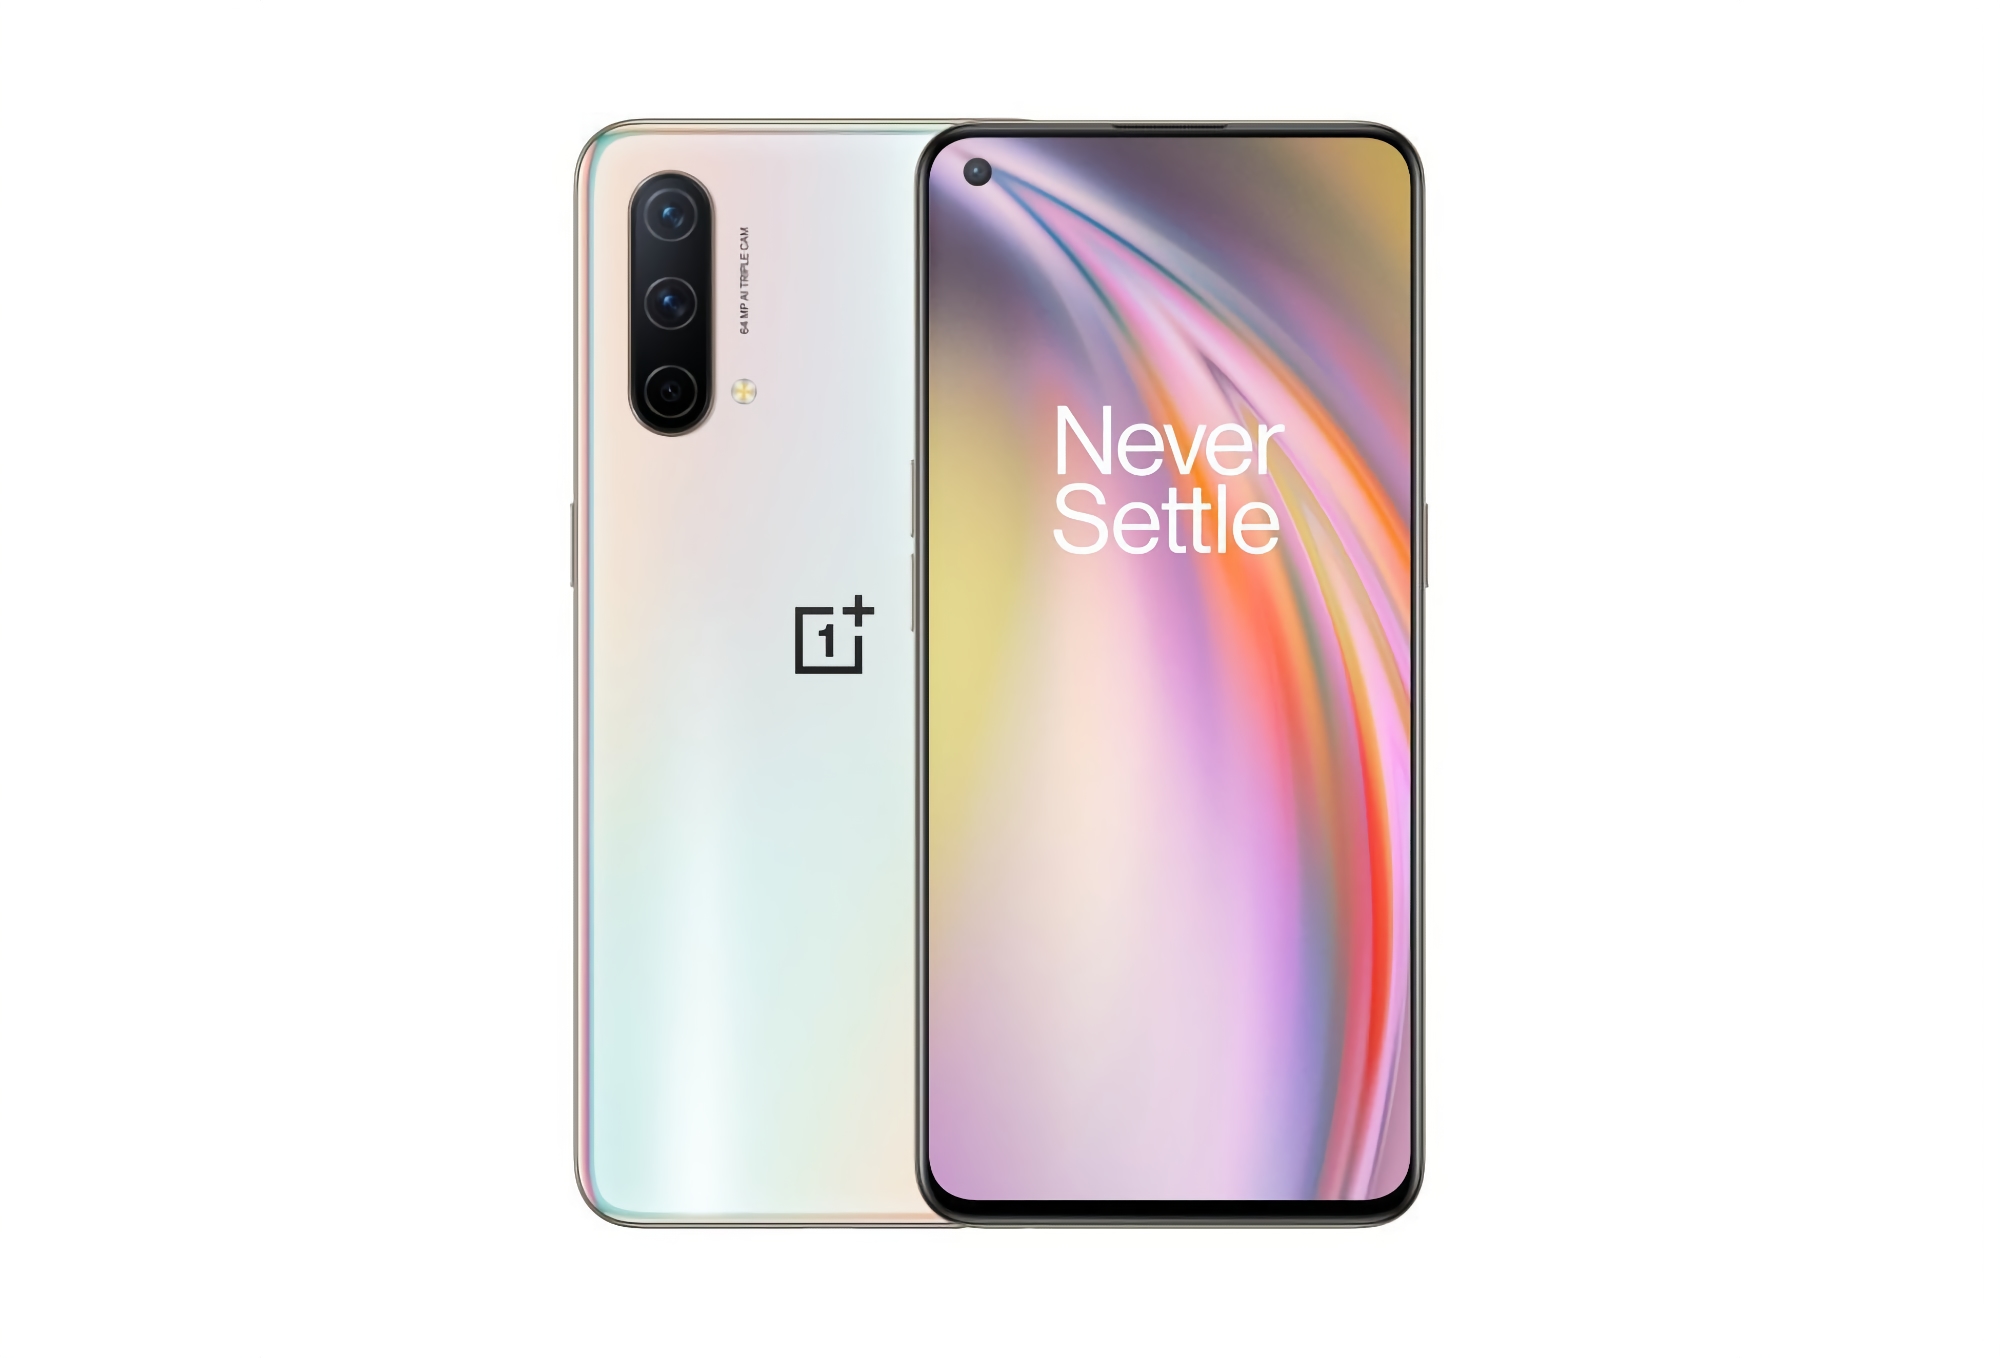 Insider: OnePlus Nord 2 CE with Dimensity 900 chip, triple camera and 90Hz screen to release in Q1 2022